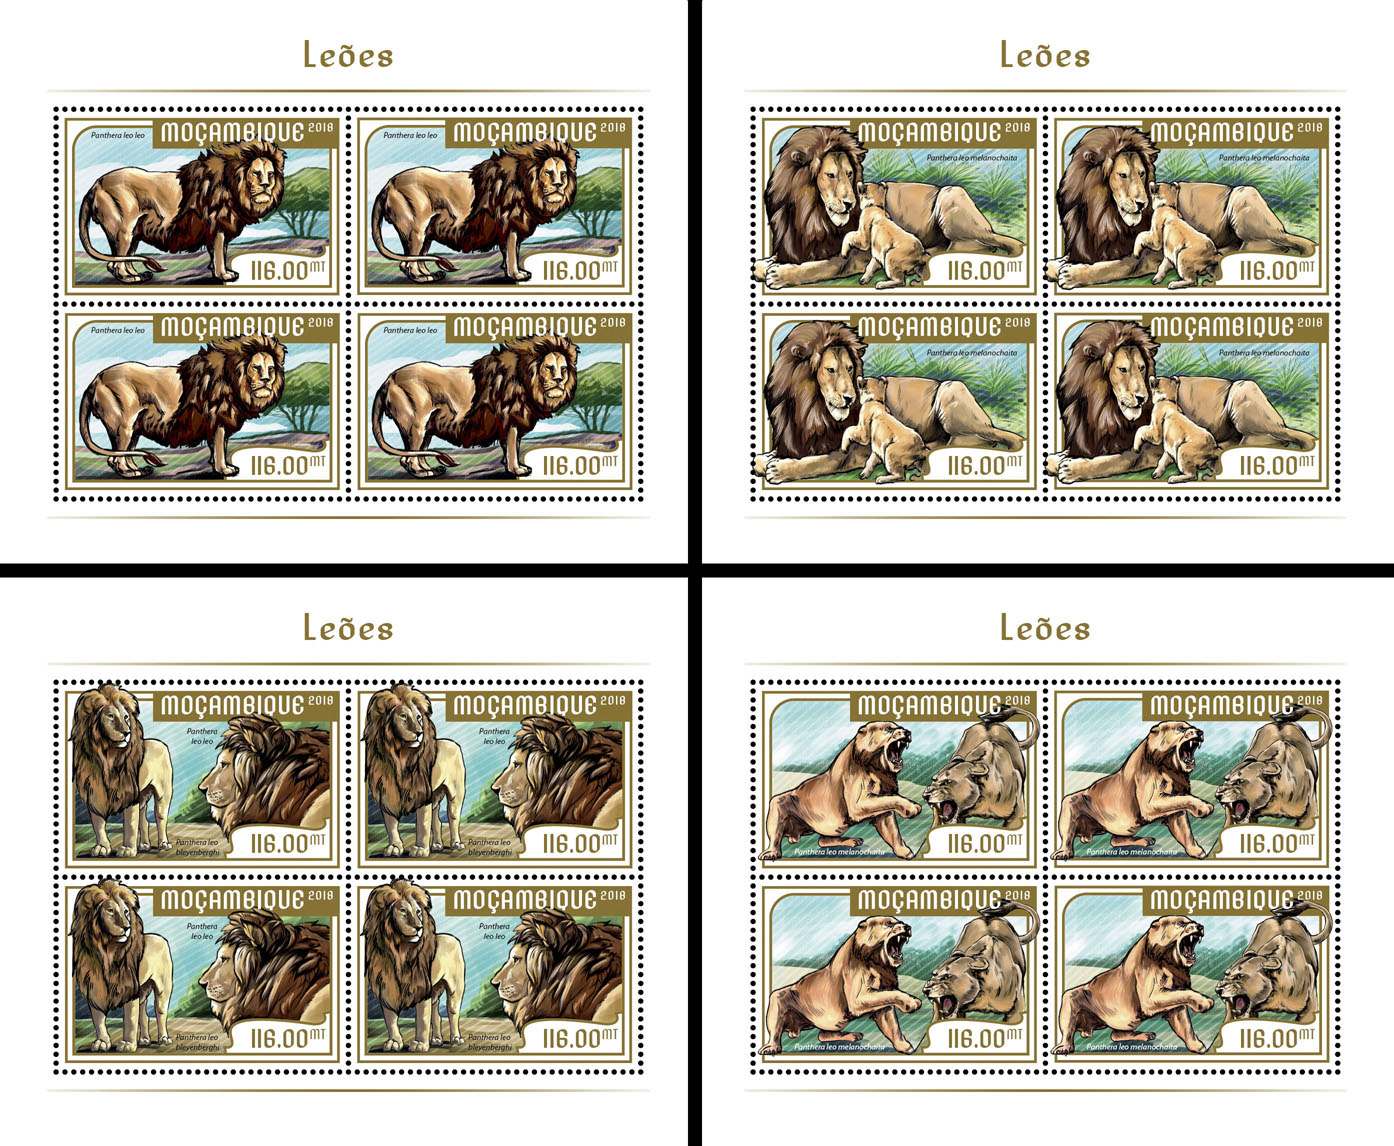 Lions (4 sets of 4 stamps) - Issue of Mozambique postage Stamps